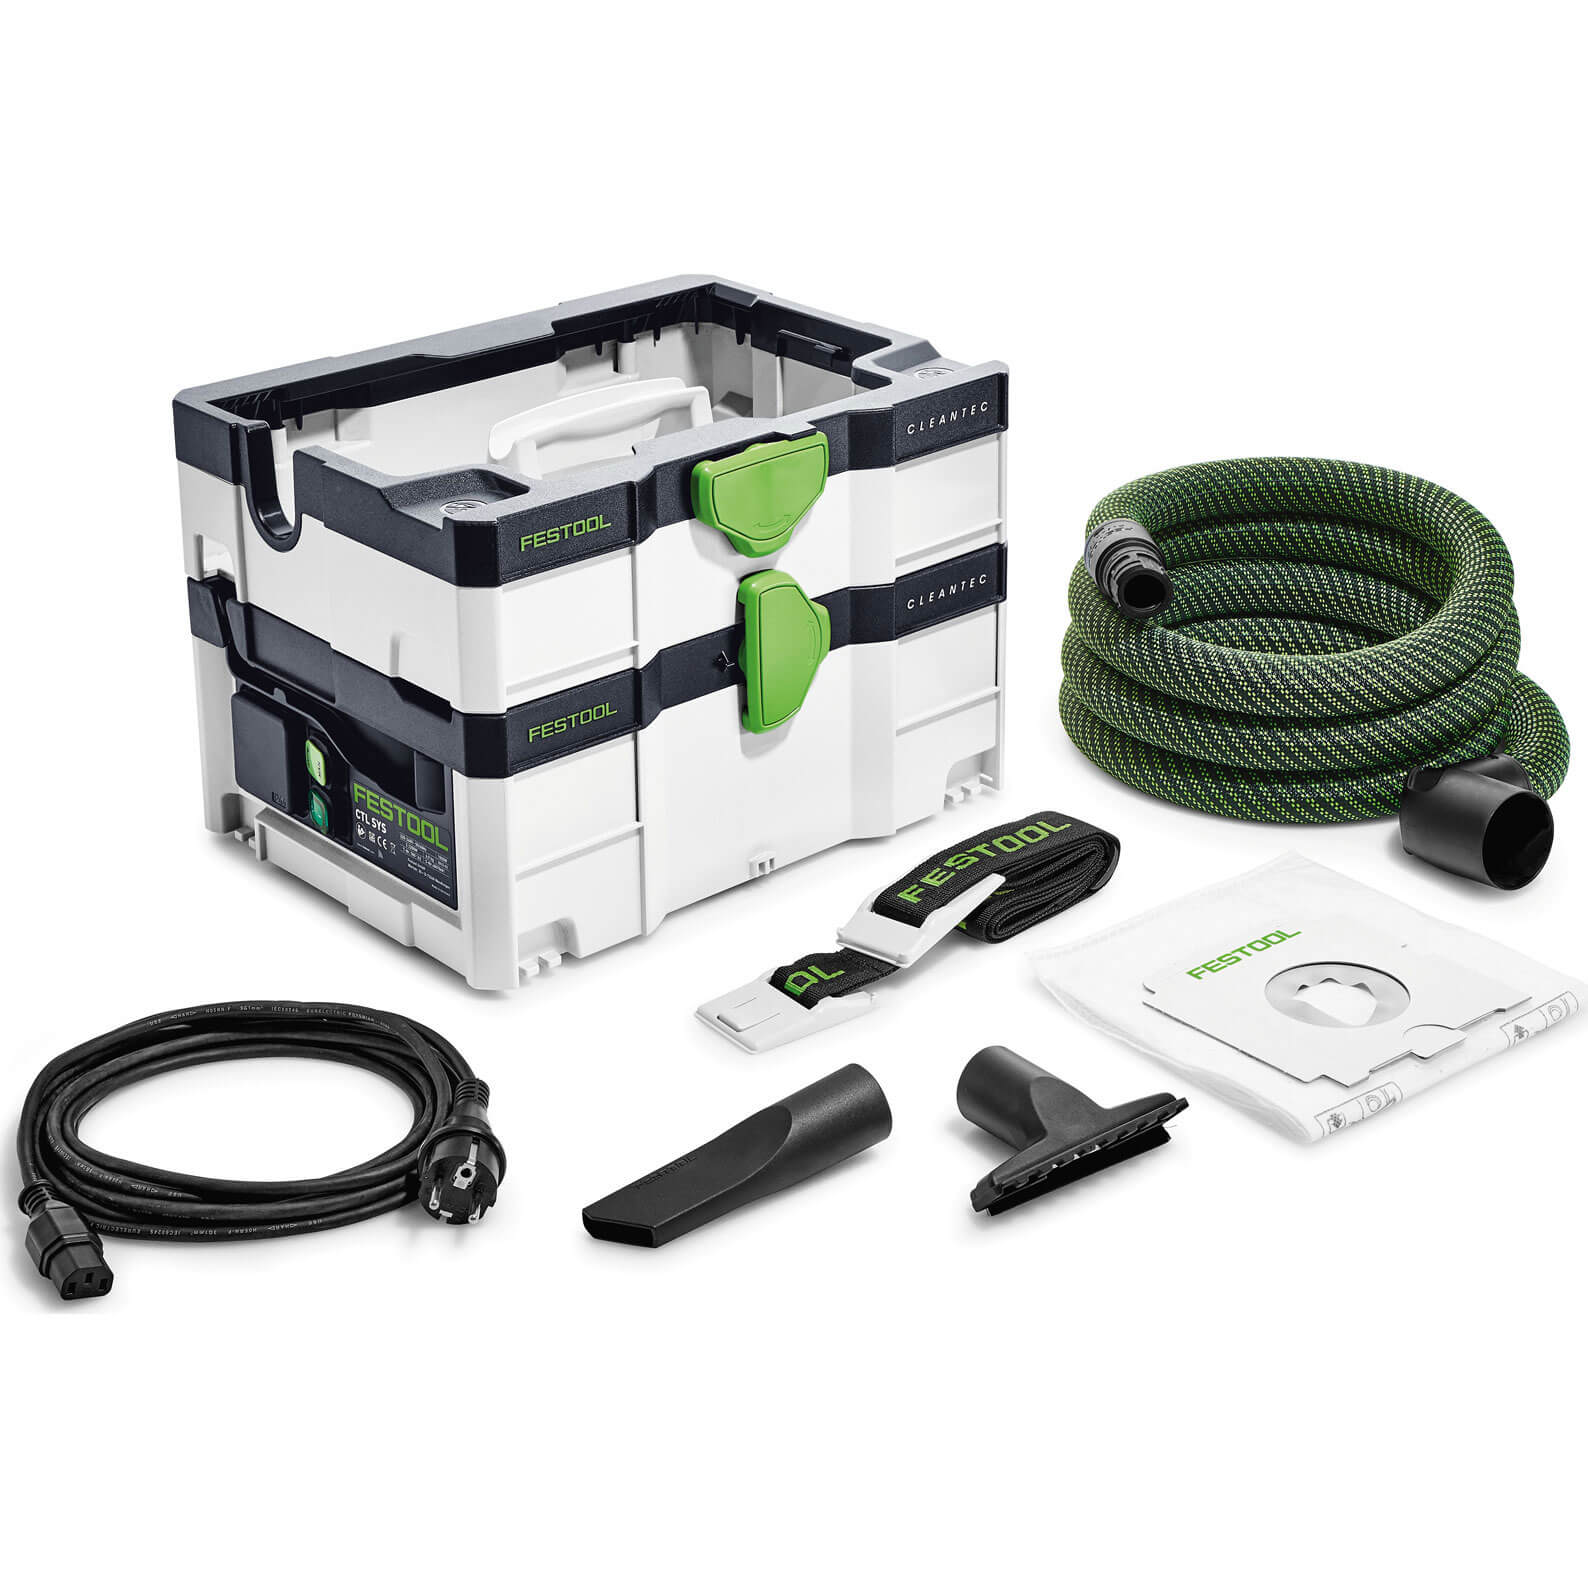 Photos - Vacuum Cleaner Festool CTL SYS Cleantec Mobile Dust Extractor 240v 575284 